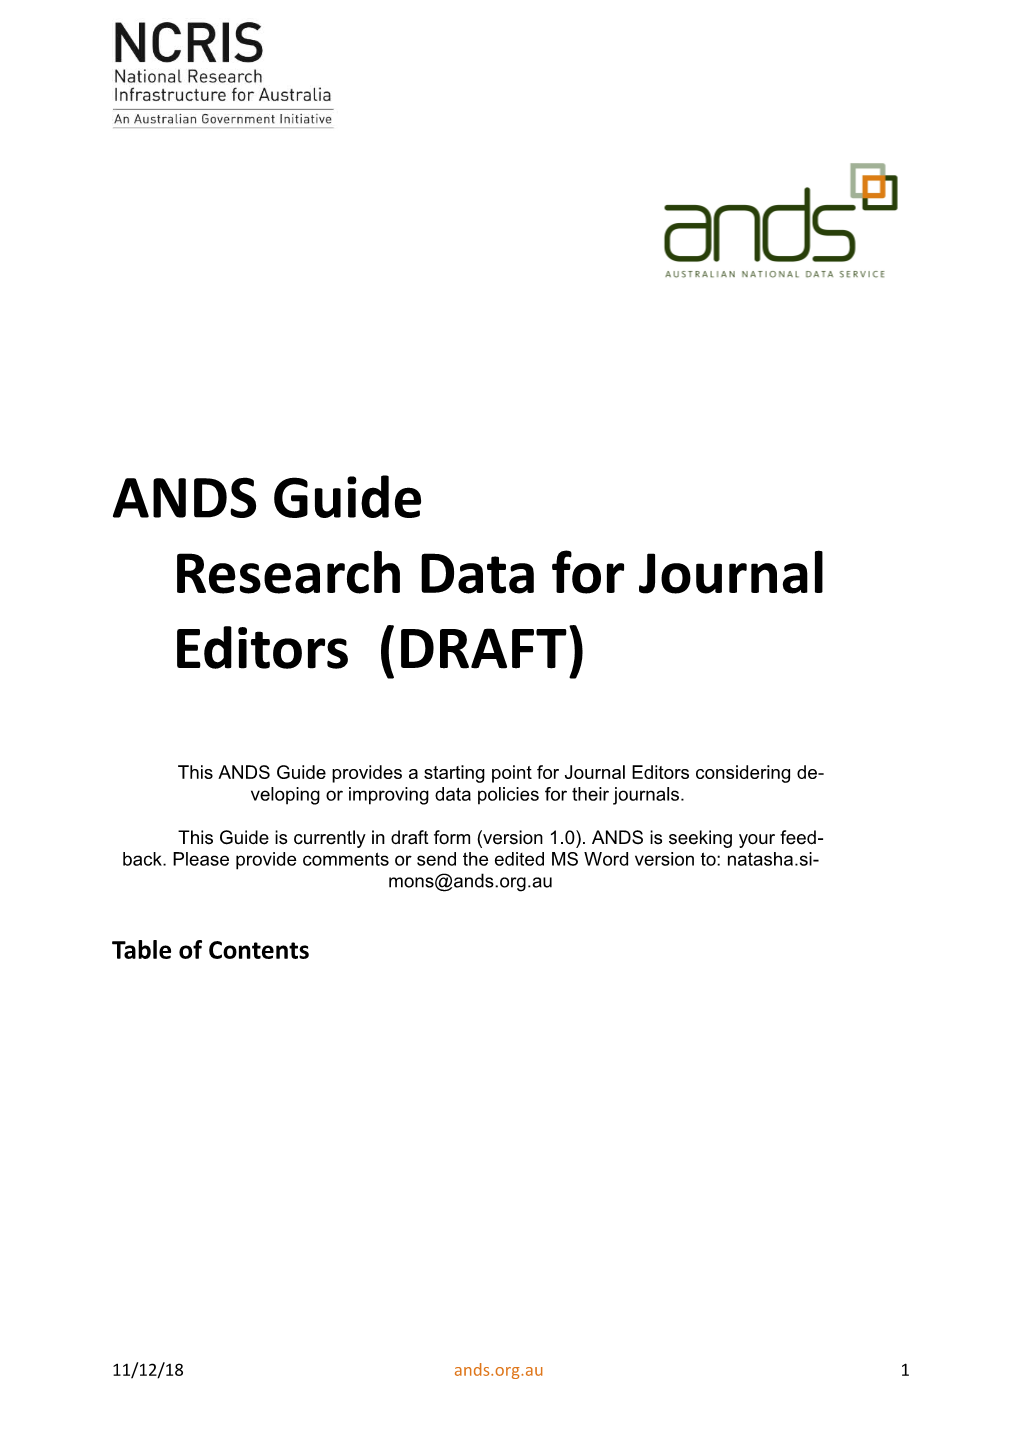 Research Data for Journal Editors (DRAFT)